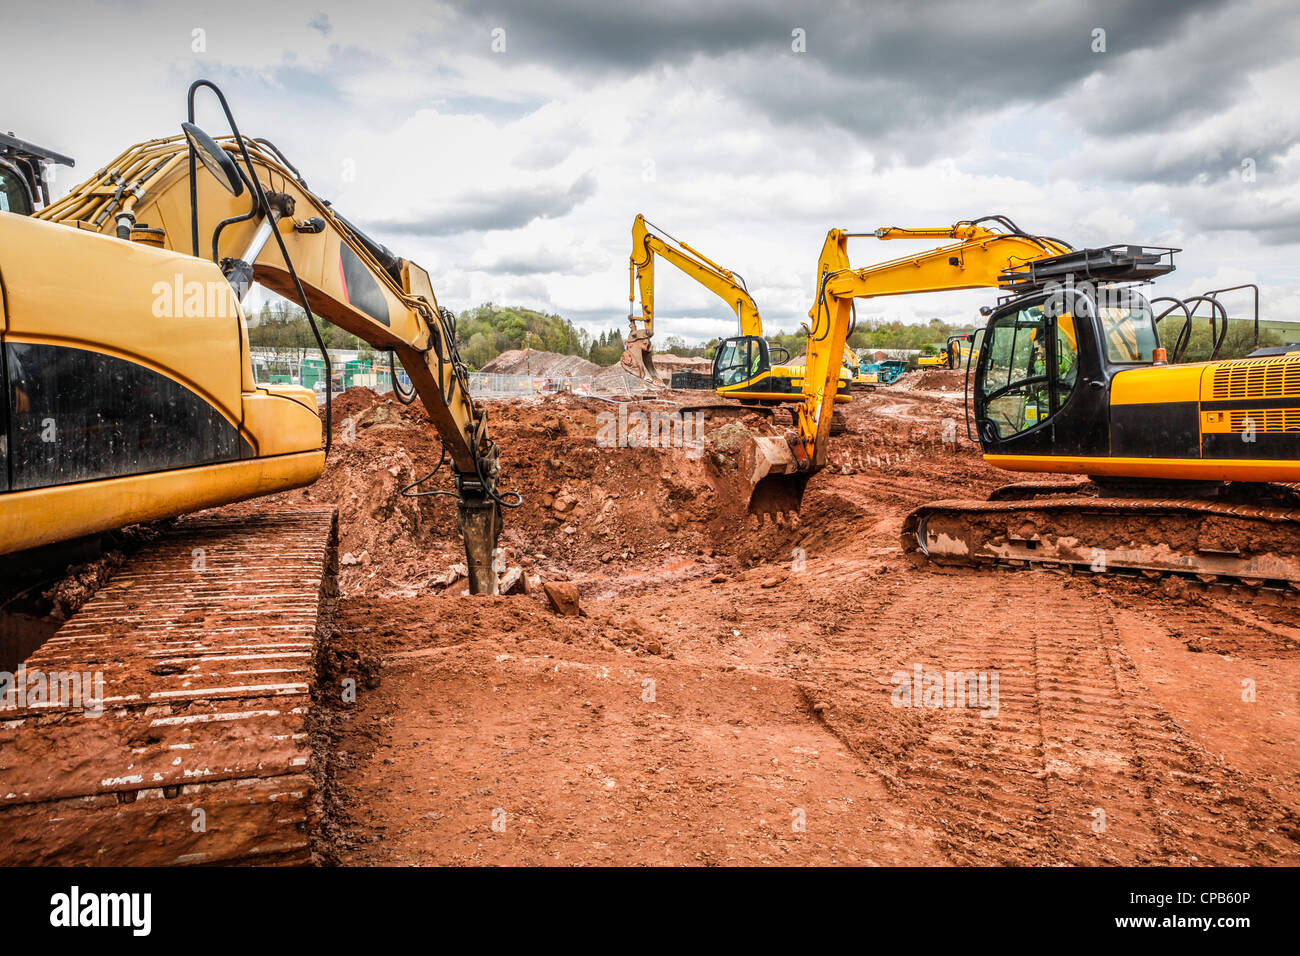 Earth moving equipment on a construction site. Digging a hole. Stock Photo